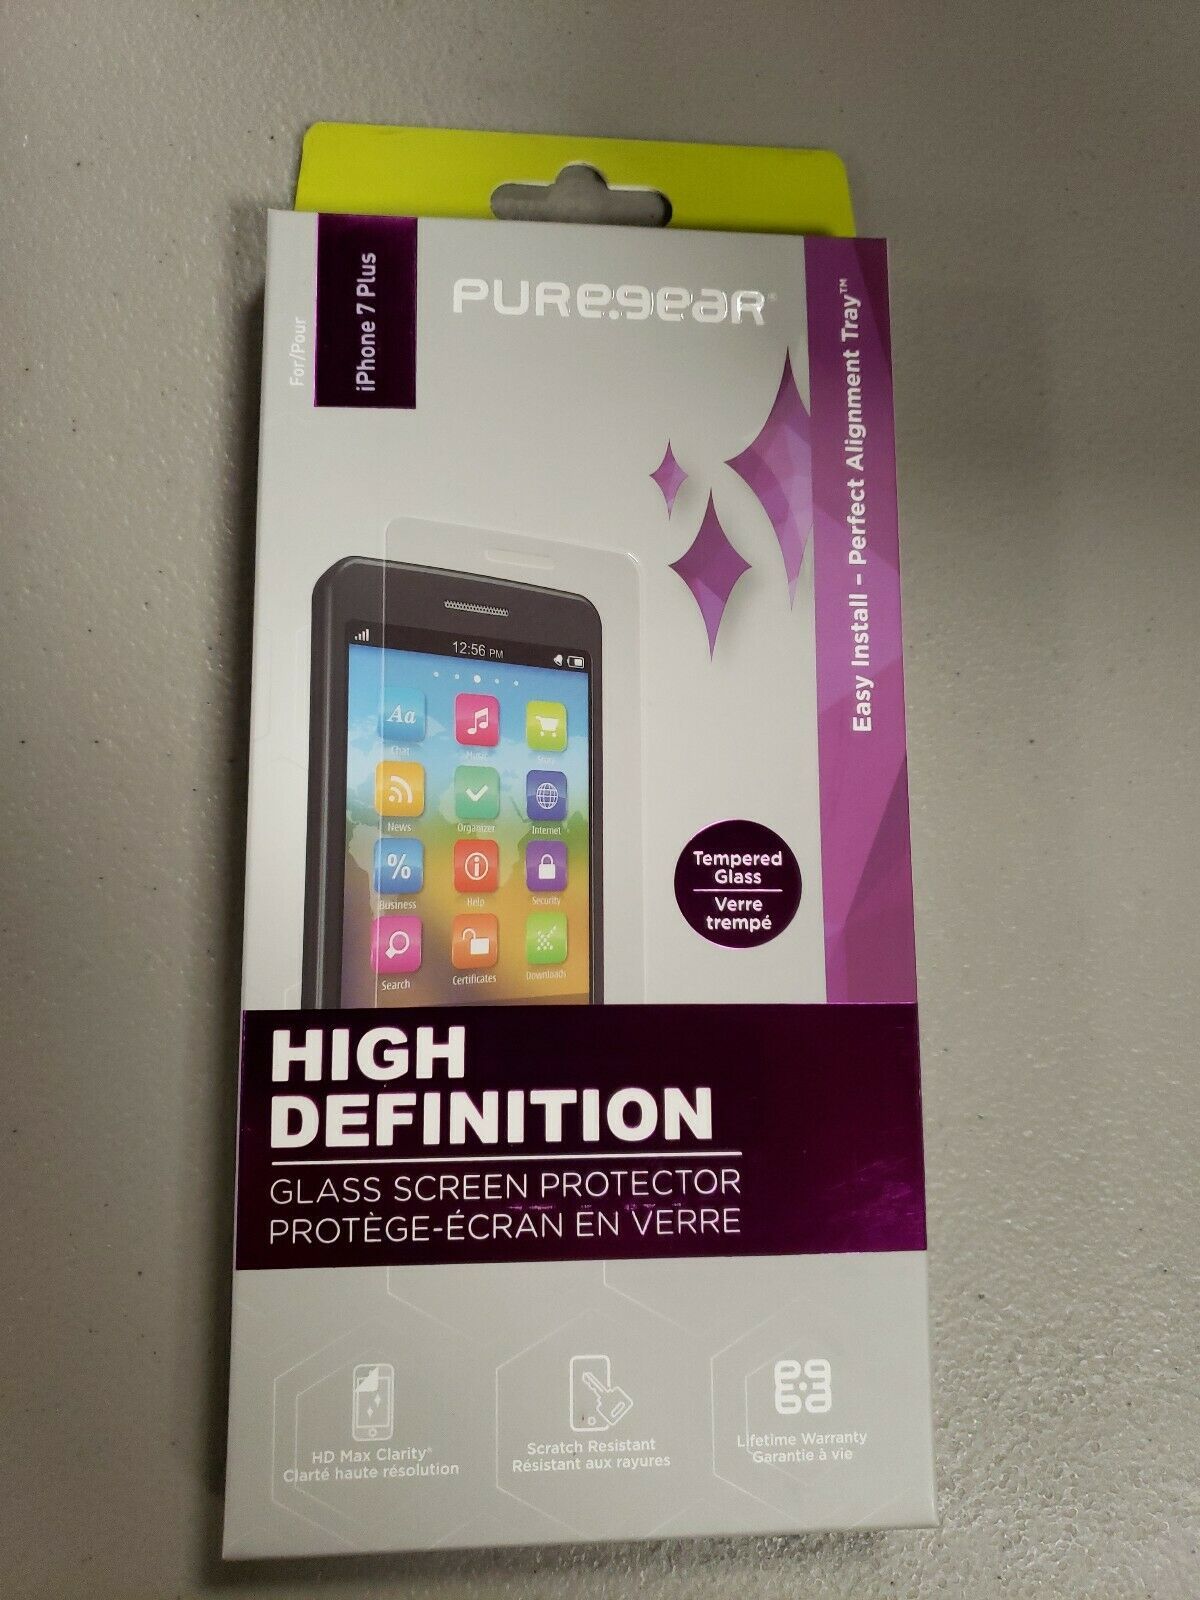 PureGear High Definition Screen Protector For iPhone 7 Plus/6s Plus/6 Plus - $26.91